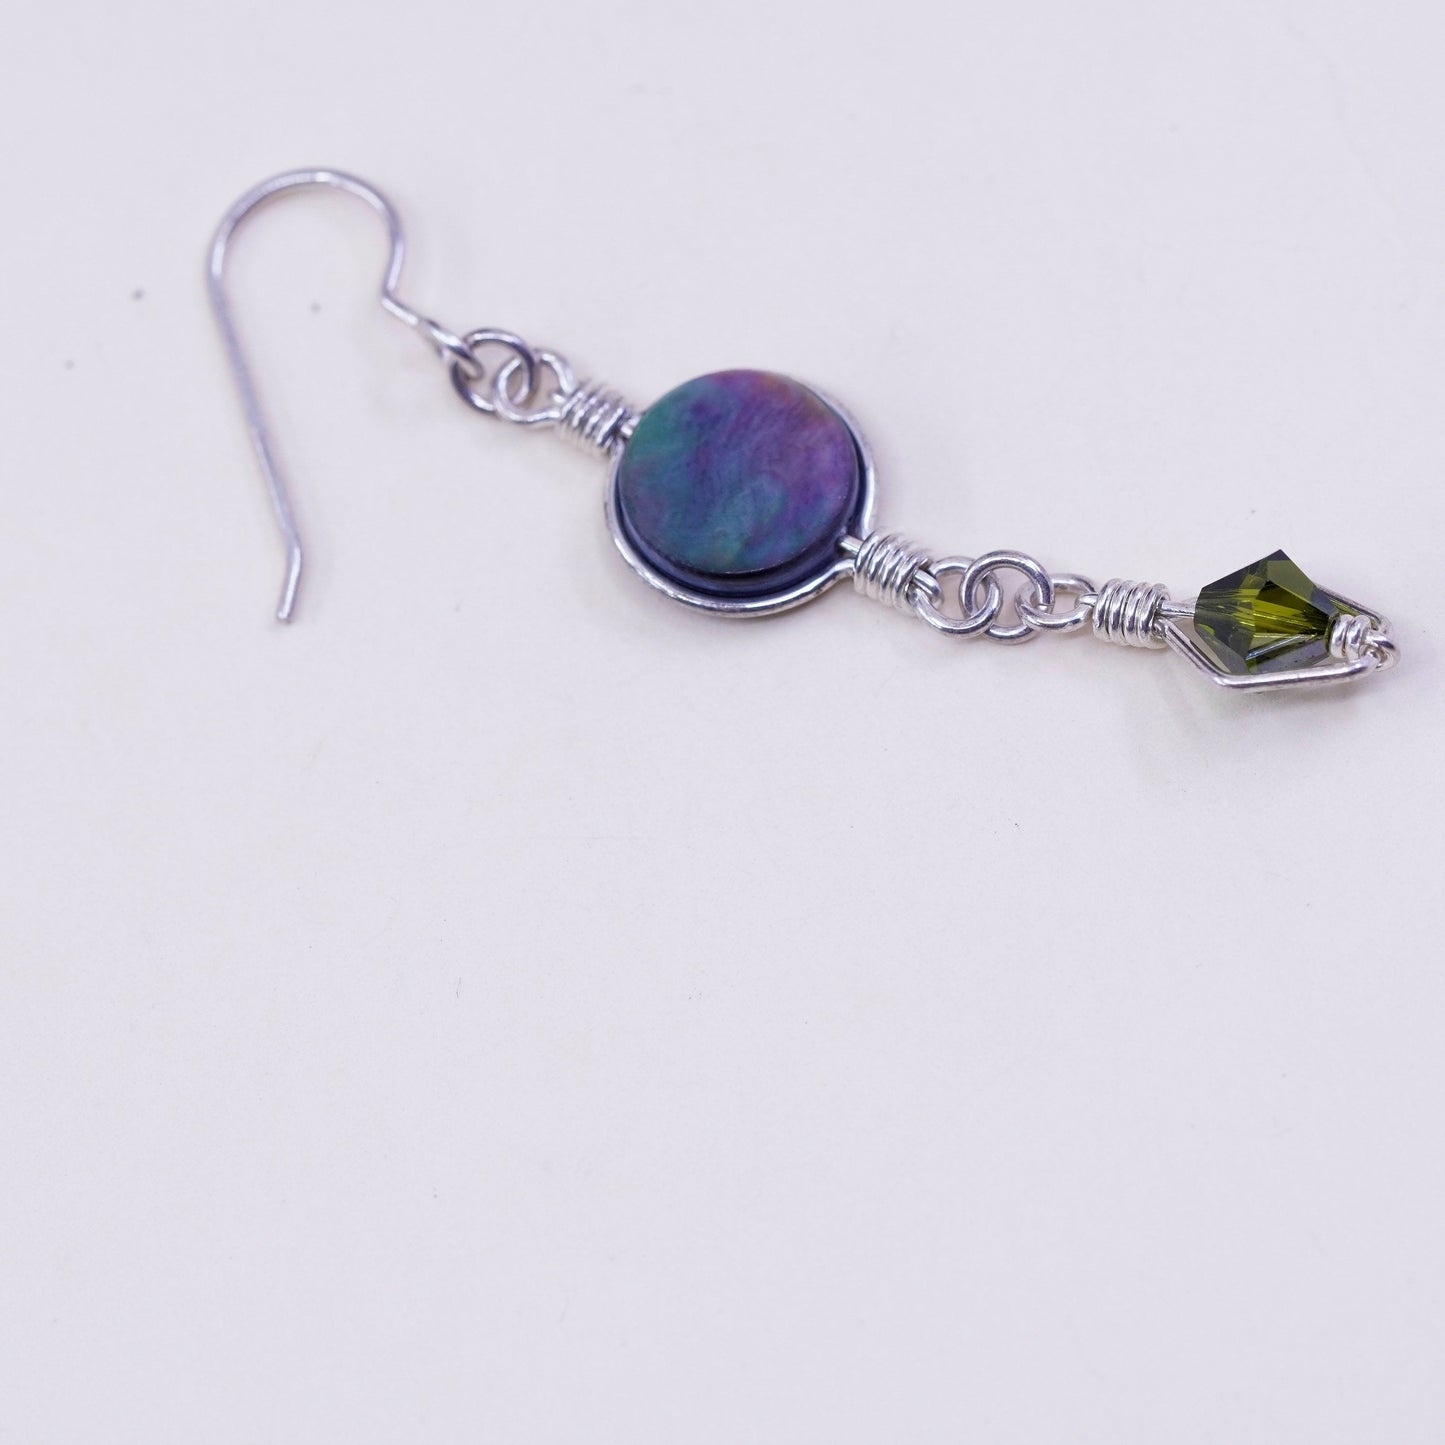 Vintage sterling silver handmade earrings, 925 hooks with circle abalone and peridot, silver tested